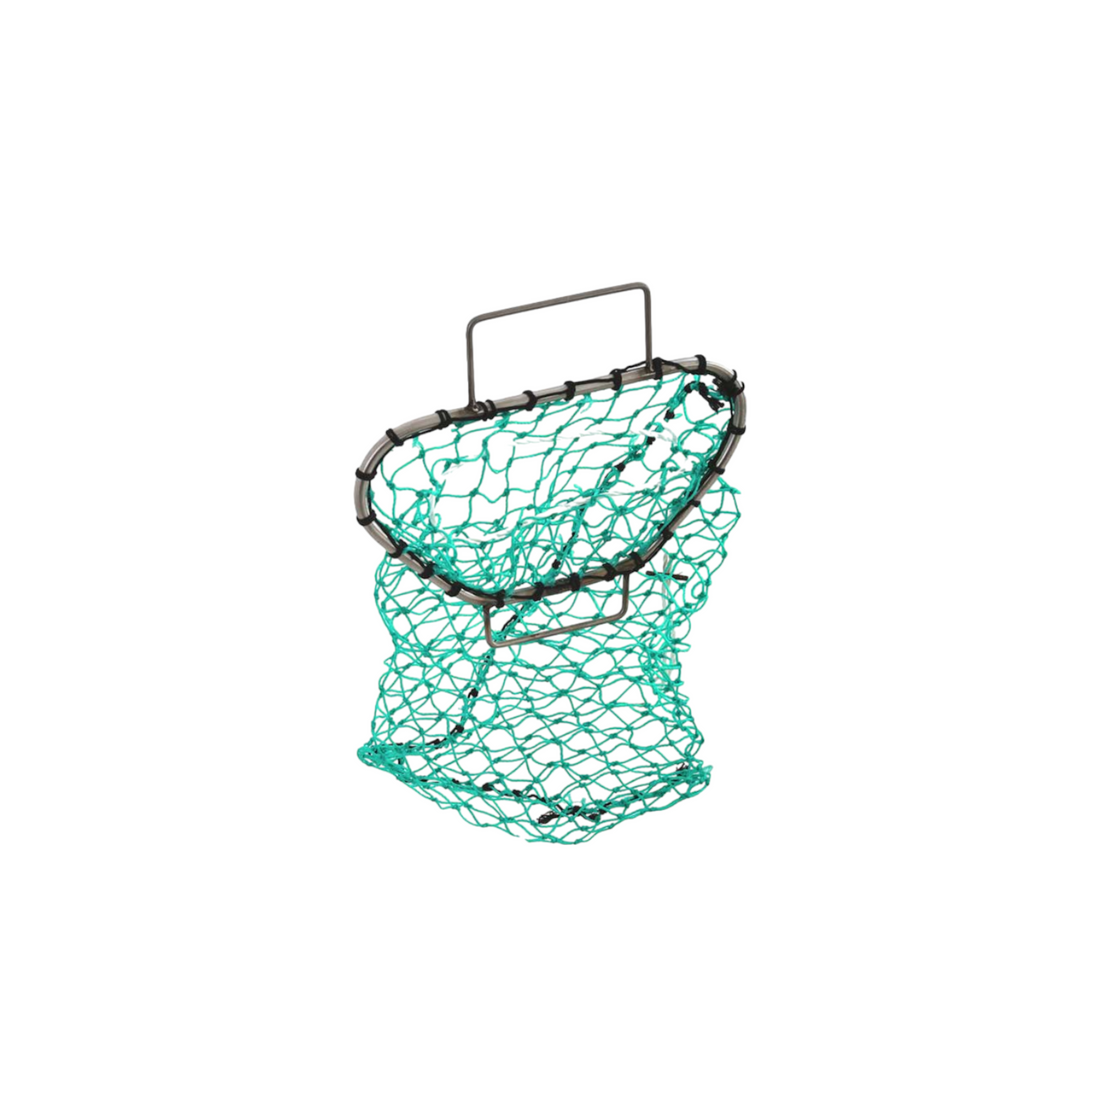 SEA HARVESTER DIVE CATCH BAG WITH STAINLESS STEEL FRAME